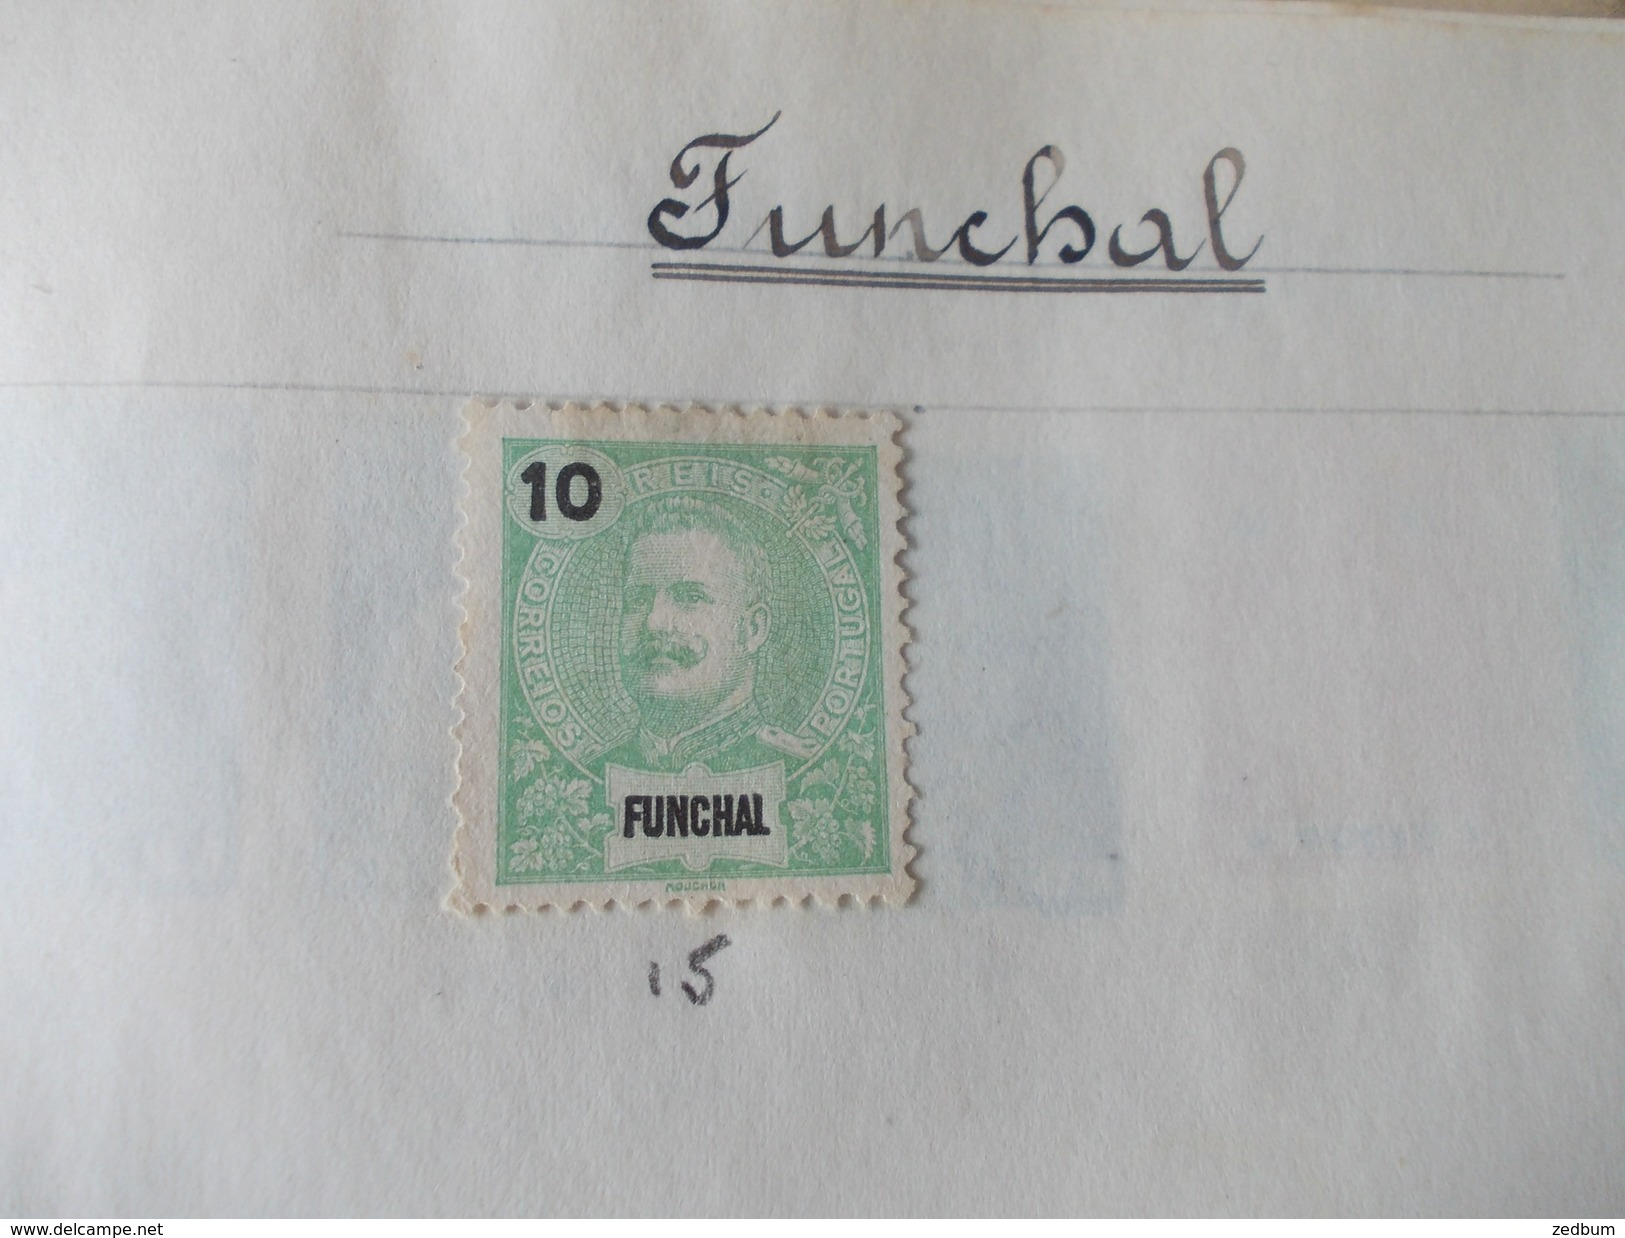 TIMBRE 5 Pages Funchal Guinée Portugaise Inde Hyderabad Hong Kong 12 Timbres Valeur 3.55 &euro; - Guinea Portoghese